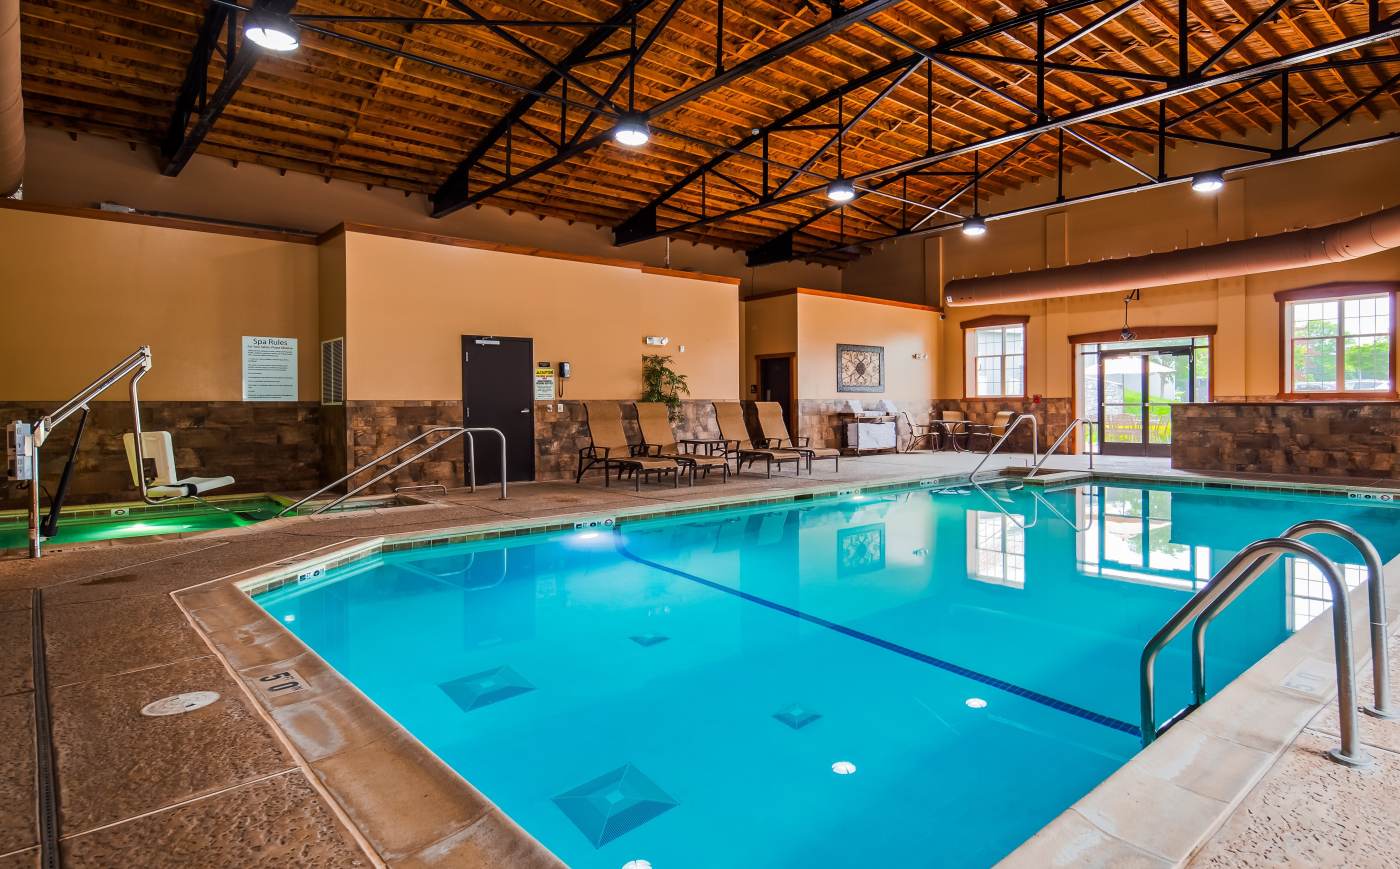 Hotel With Hot Tub And Indoor Pool Hotels With Indoor Pools Hot Tub